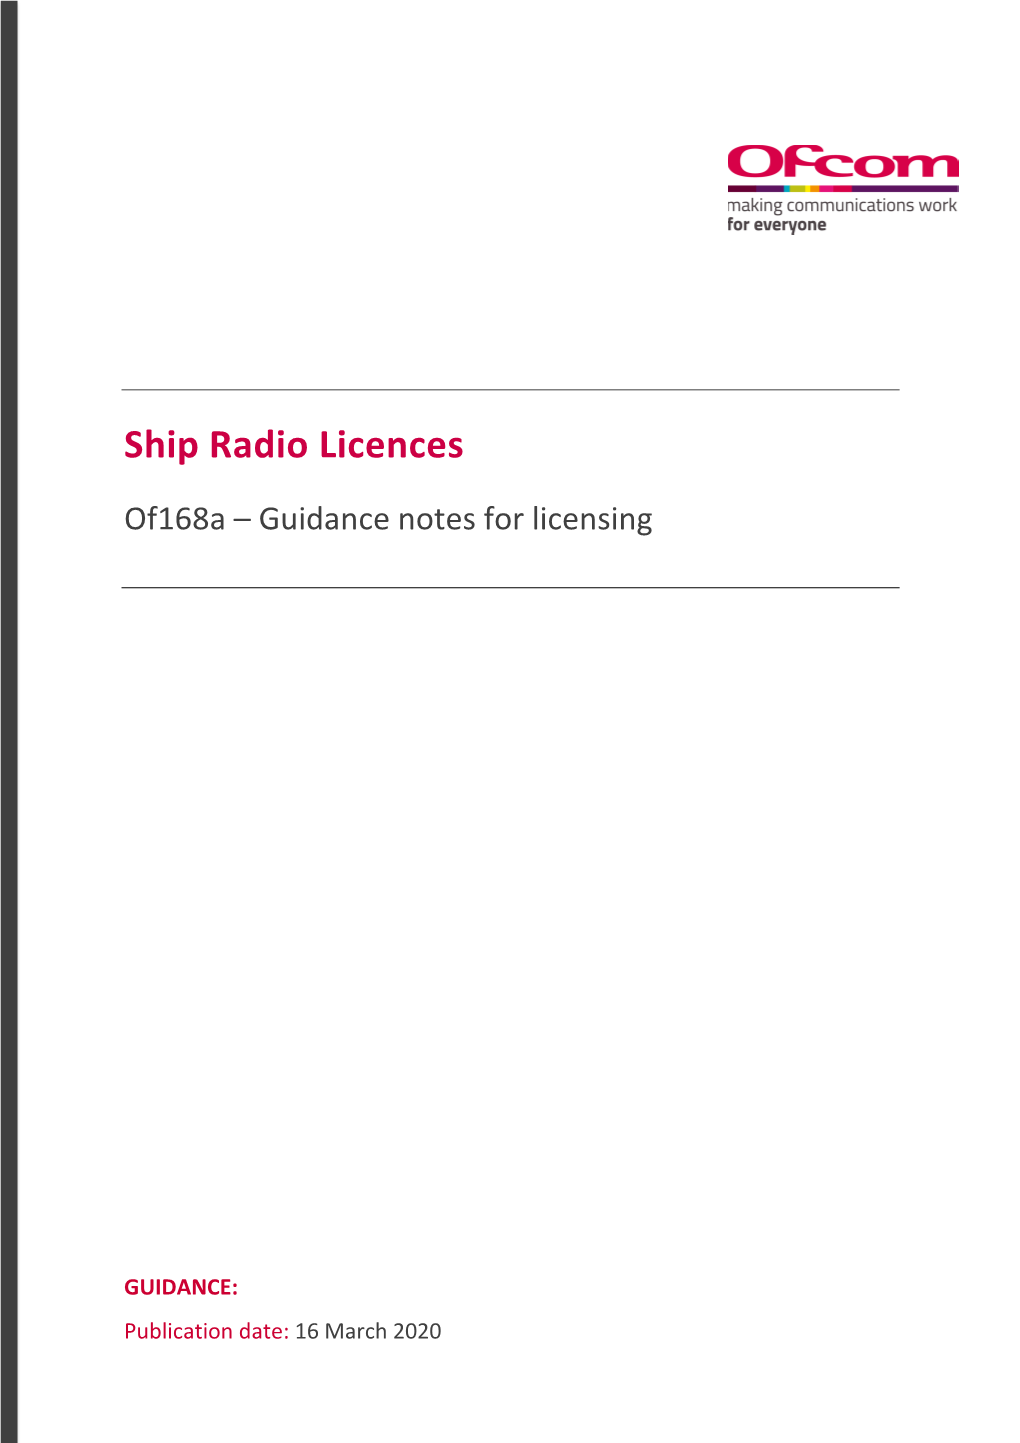 Ship Radio Guidance Notes for Licensing